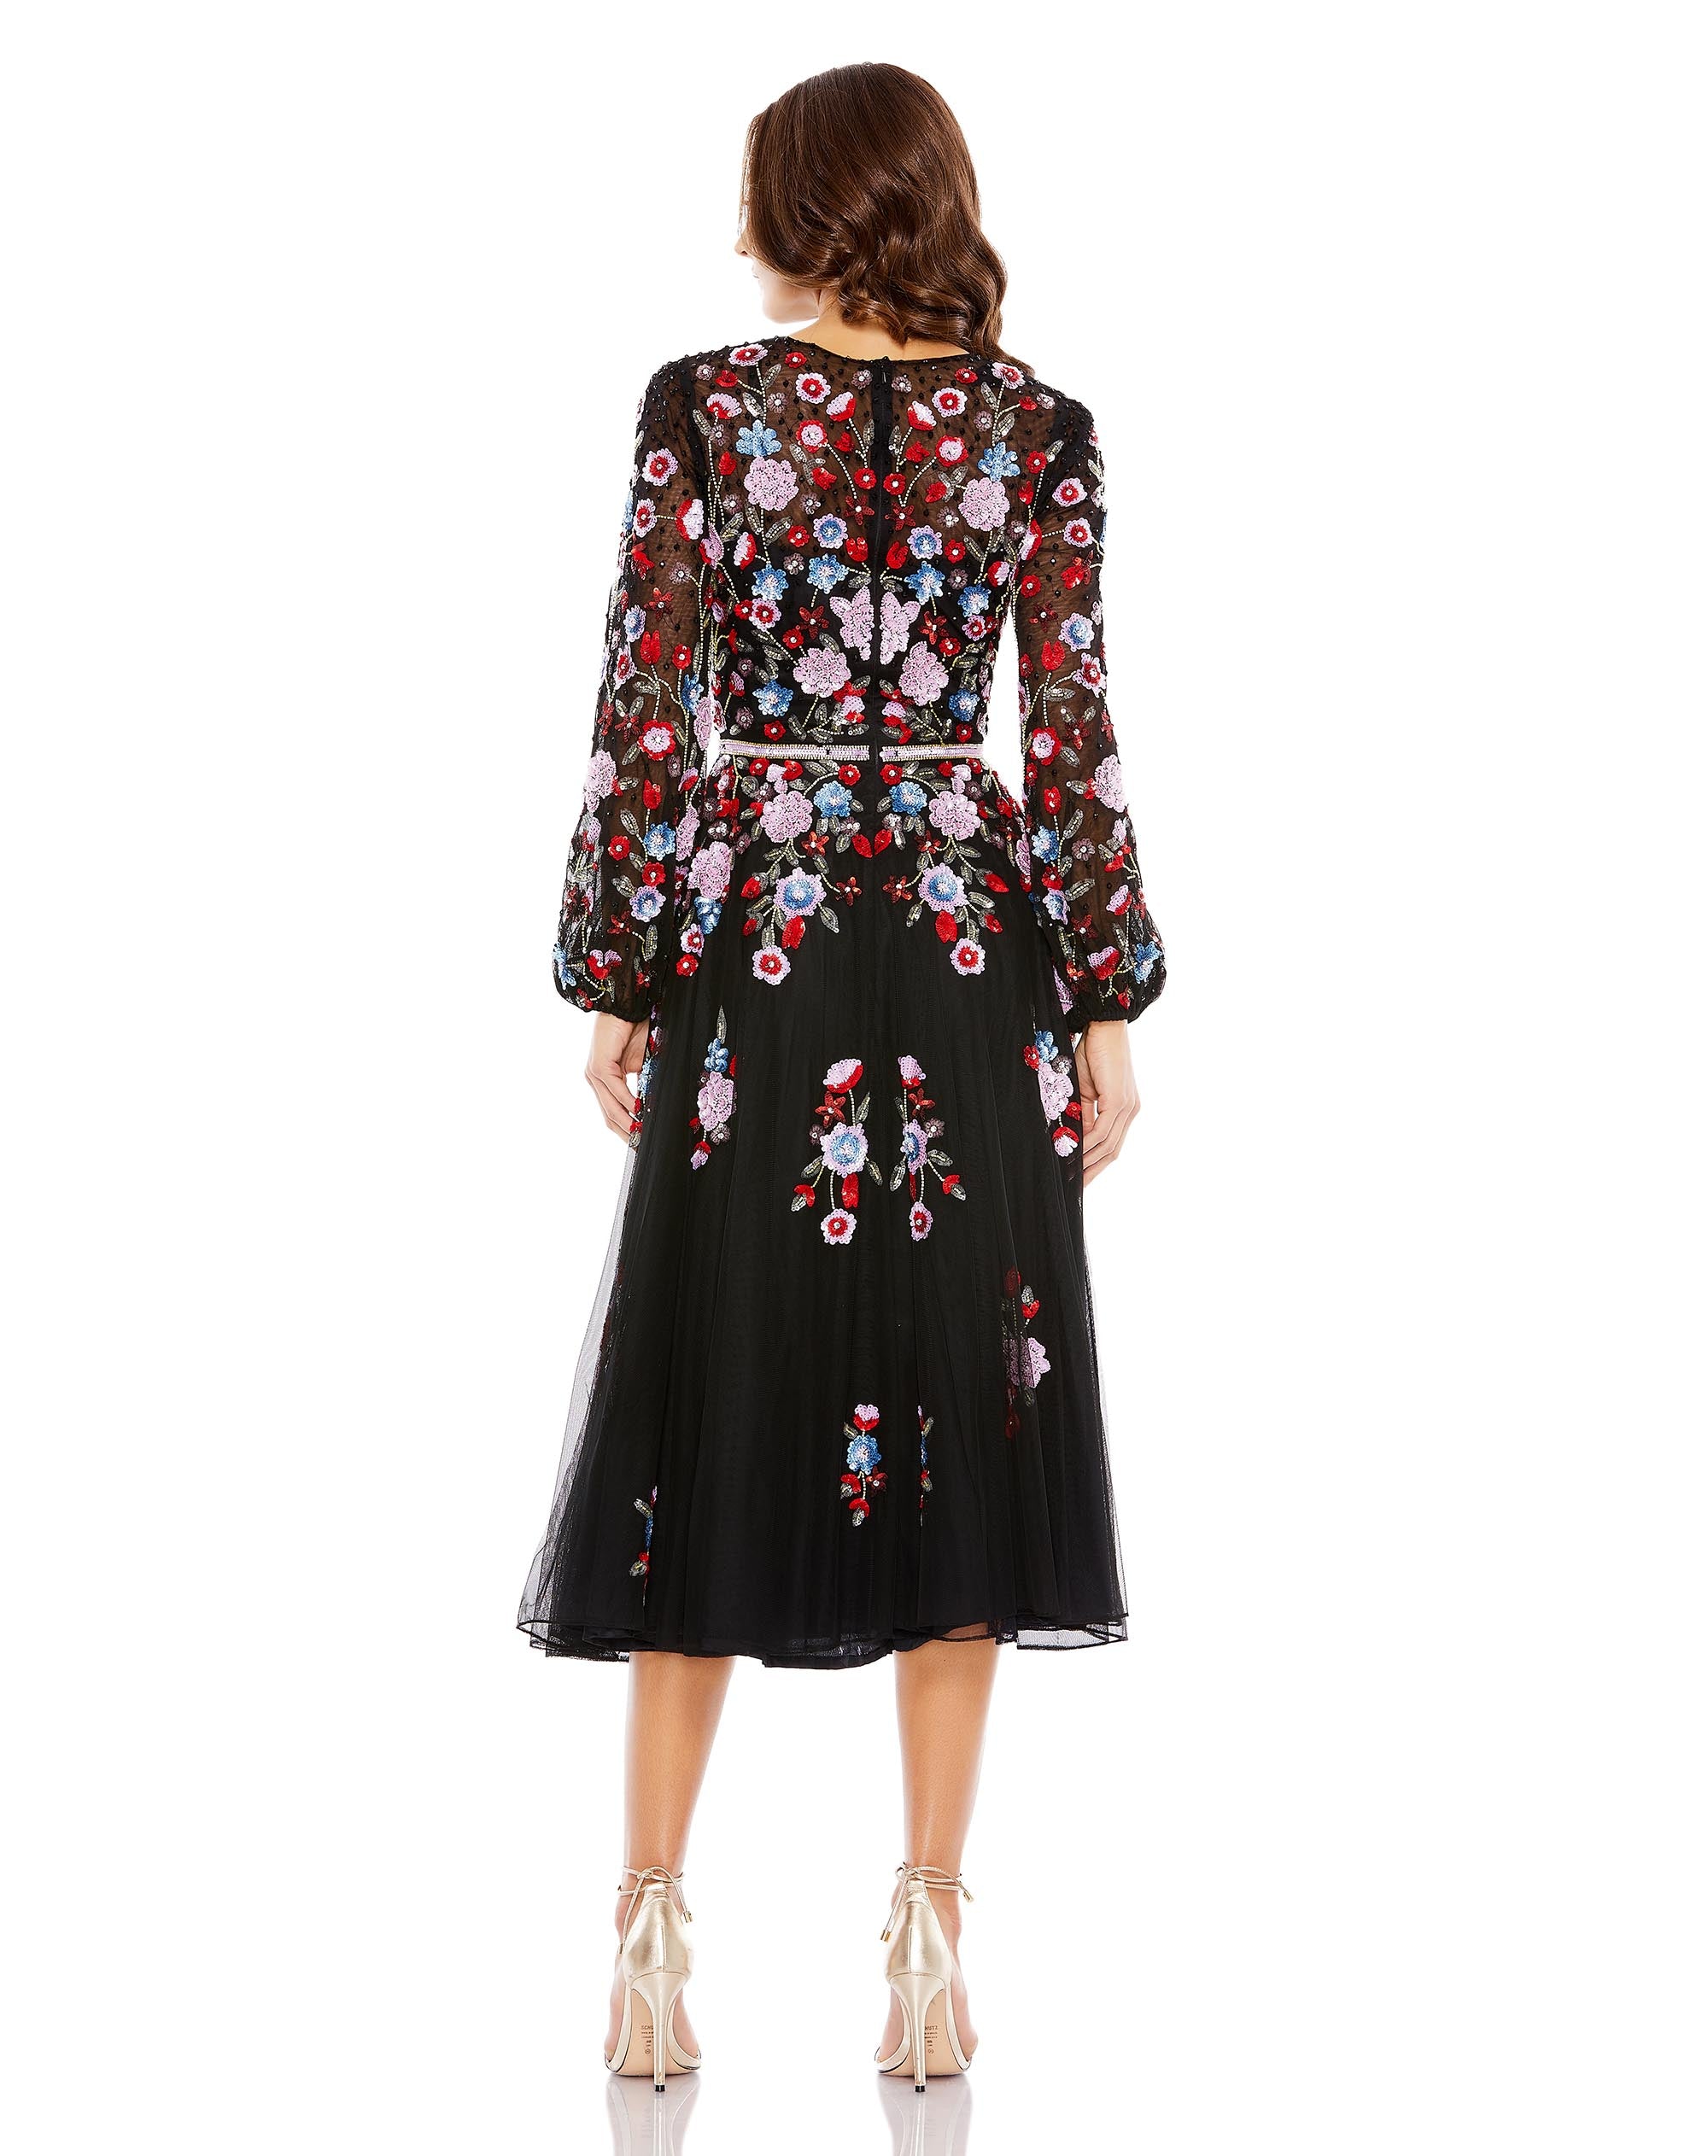 Sequined Floral High Neck Puff Sleeve Cocktail Dress